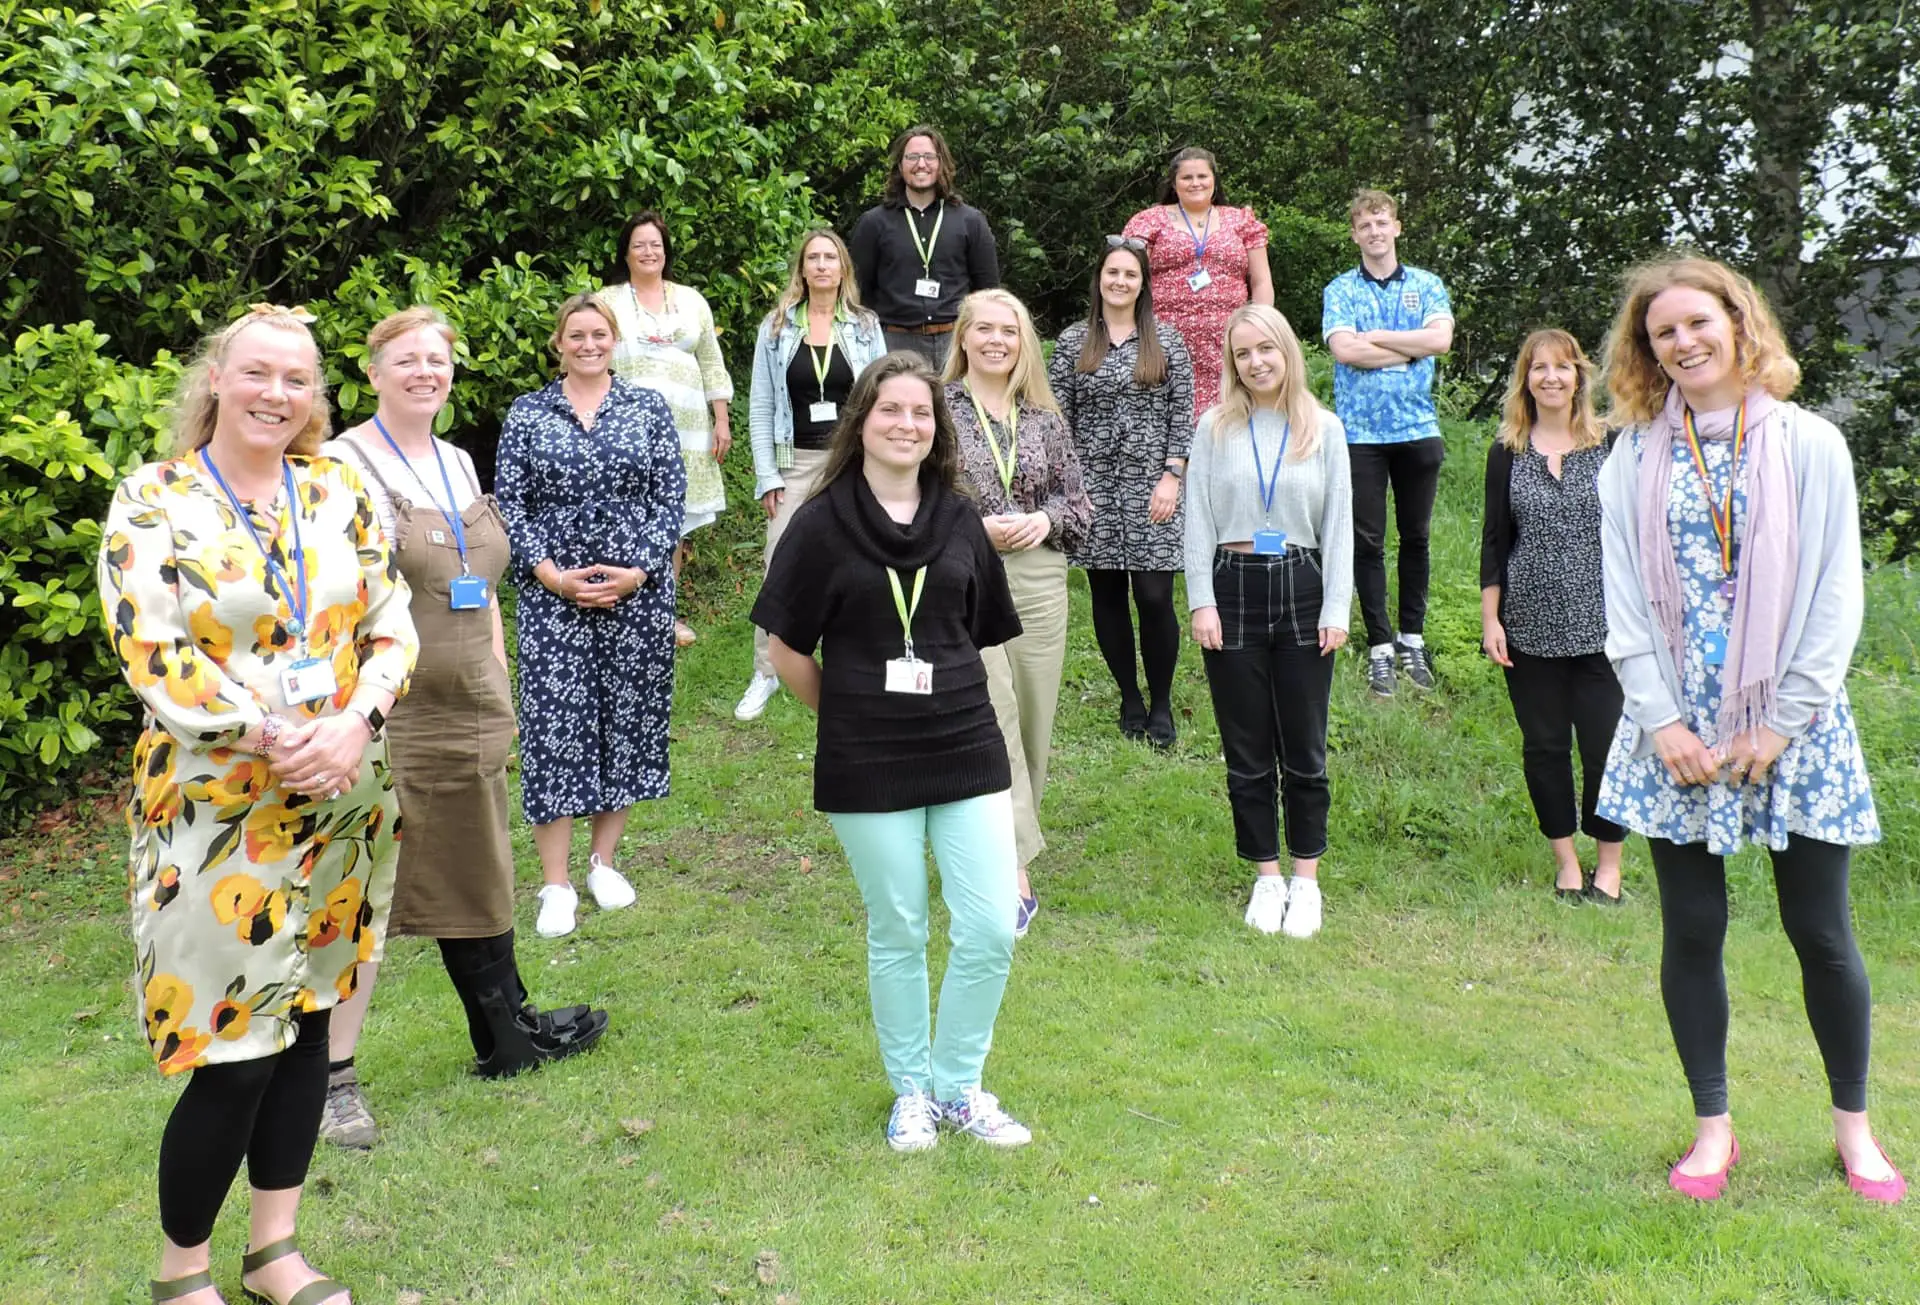 Members of the mental health support team